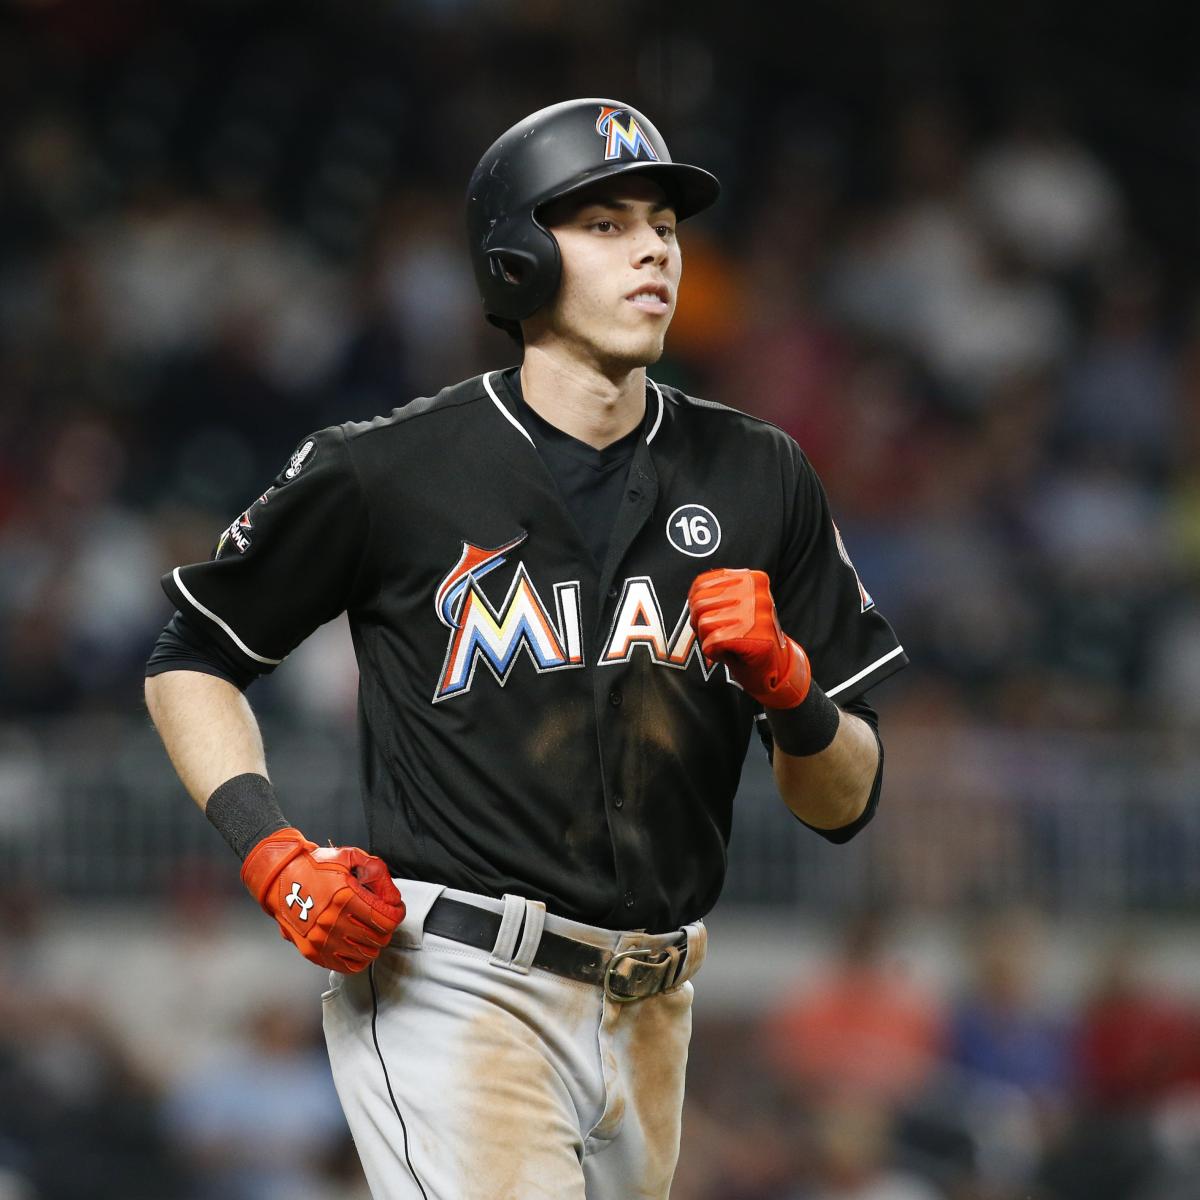 Former Marlin Christian Yelich speaks highly of catcher J.T. Realmuto, who  could be Mets target – New York Daily News